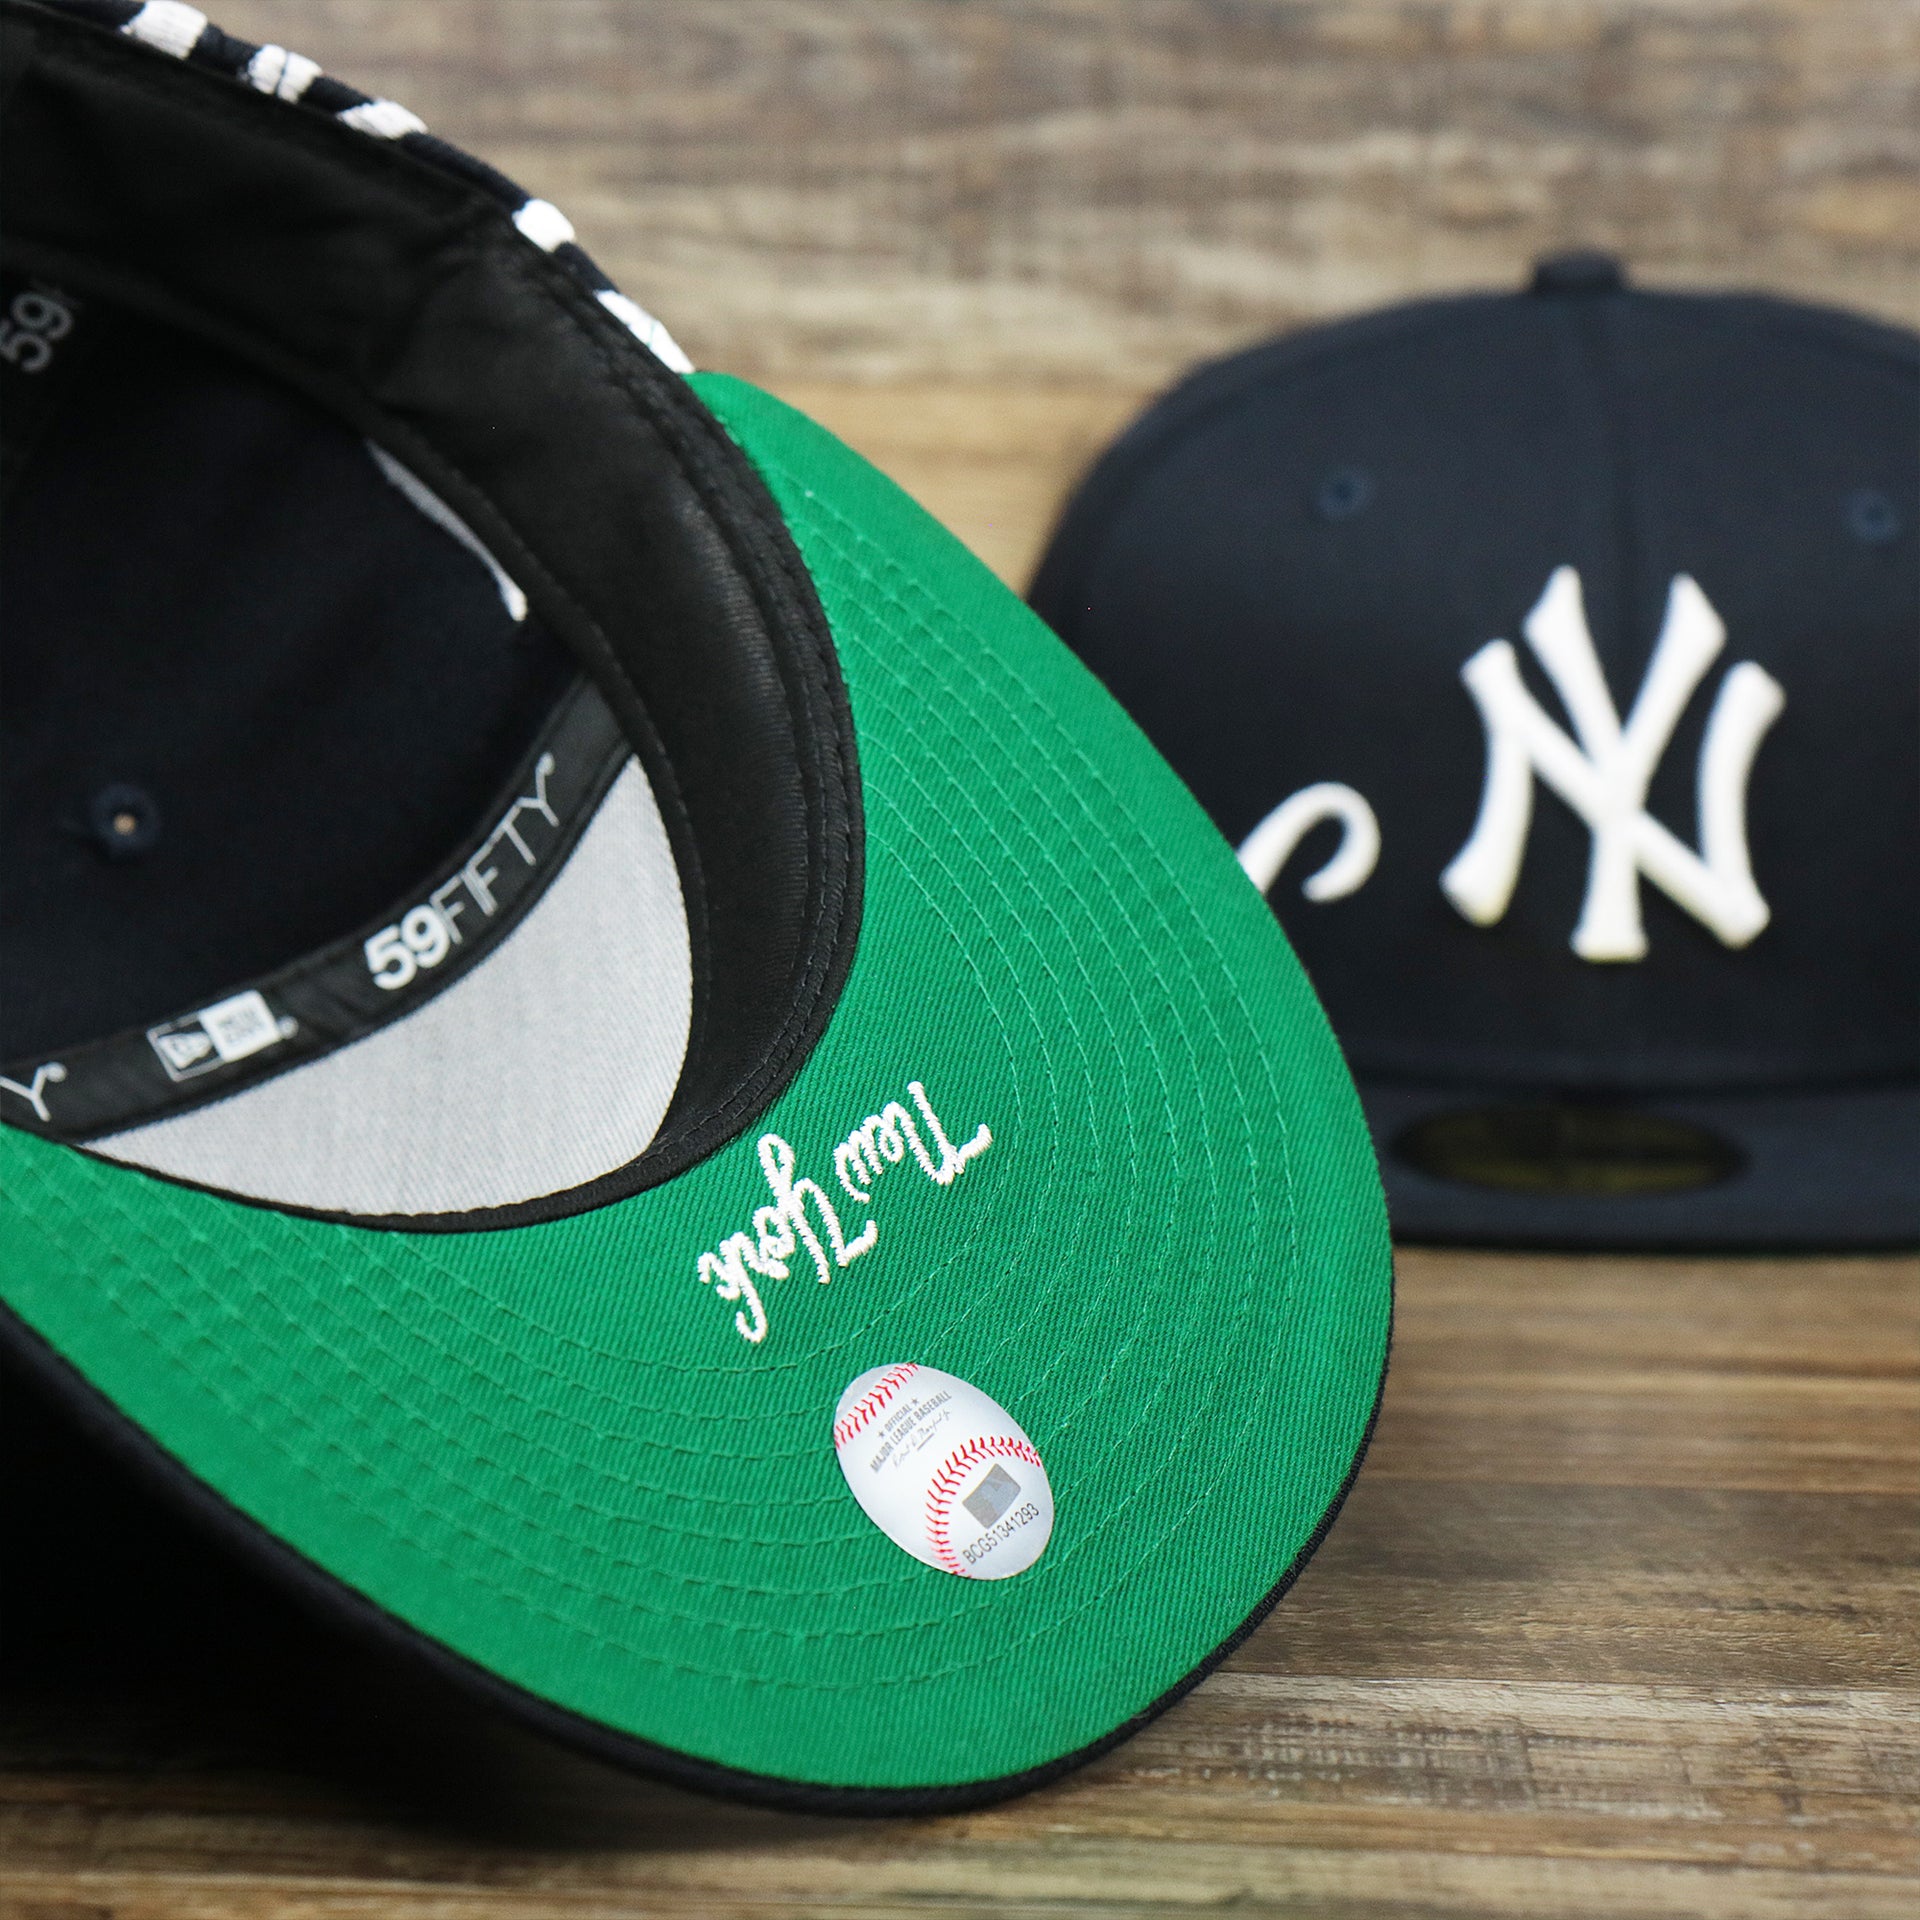 The undervisor on the New York Wordmark Side Split New York Yankees Vintage Green Bottom Embroidered Undervisor Fitted Cap | Navy Blue 59Fifty Cap